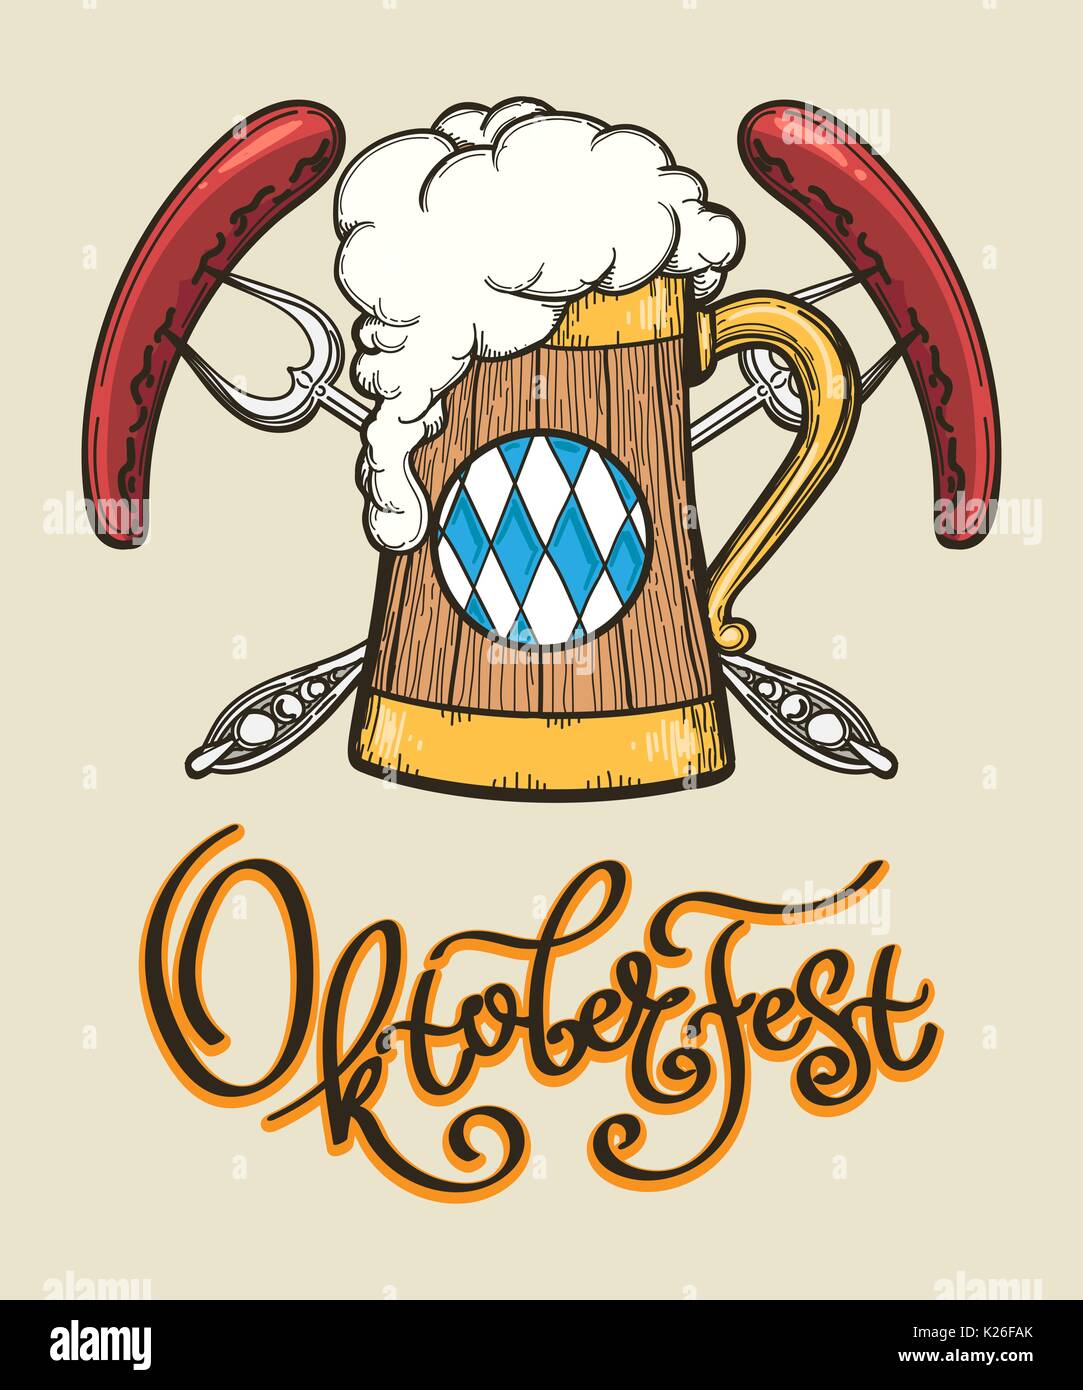 Retro Oktoberfest design. Poster with beer mug and two sausages on forks. Vector illustration. Stock Vector